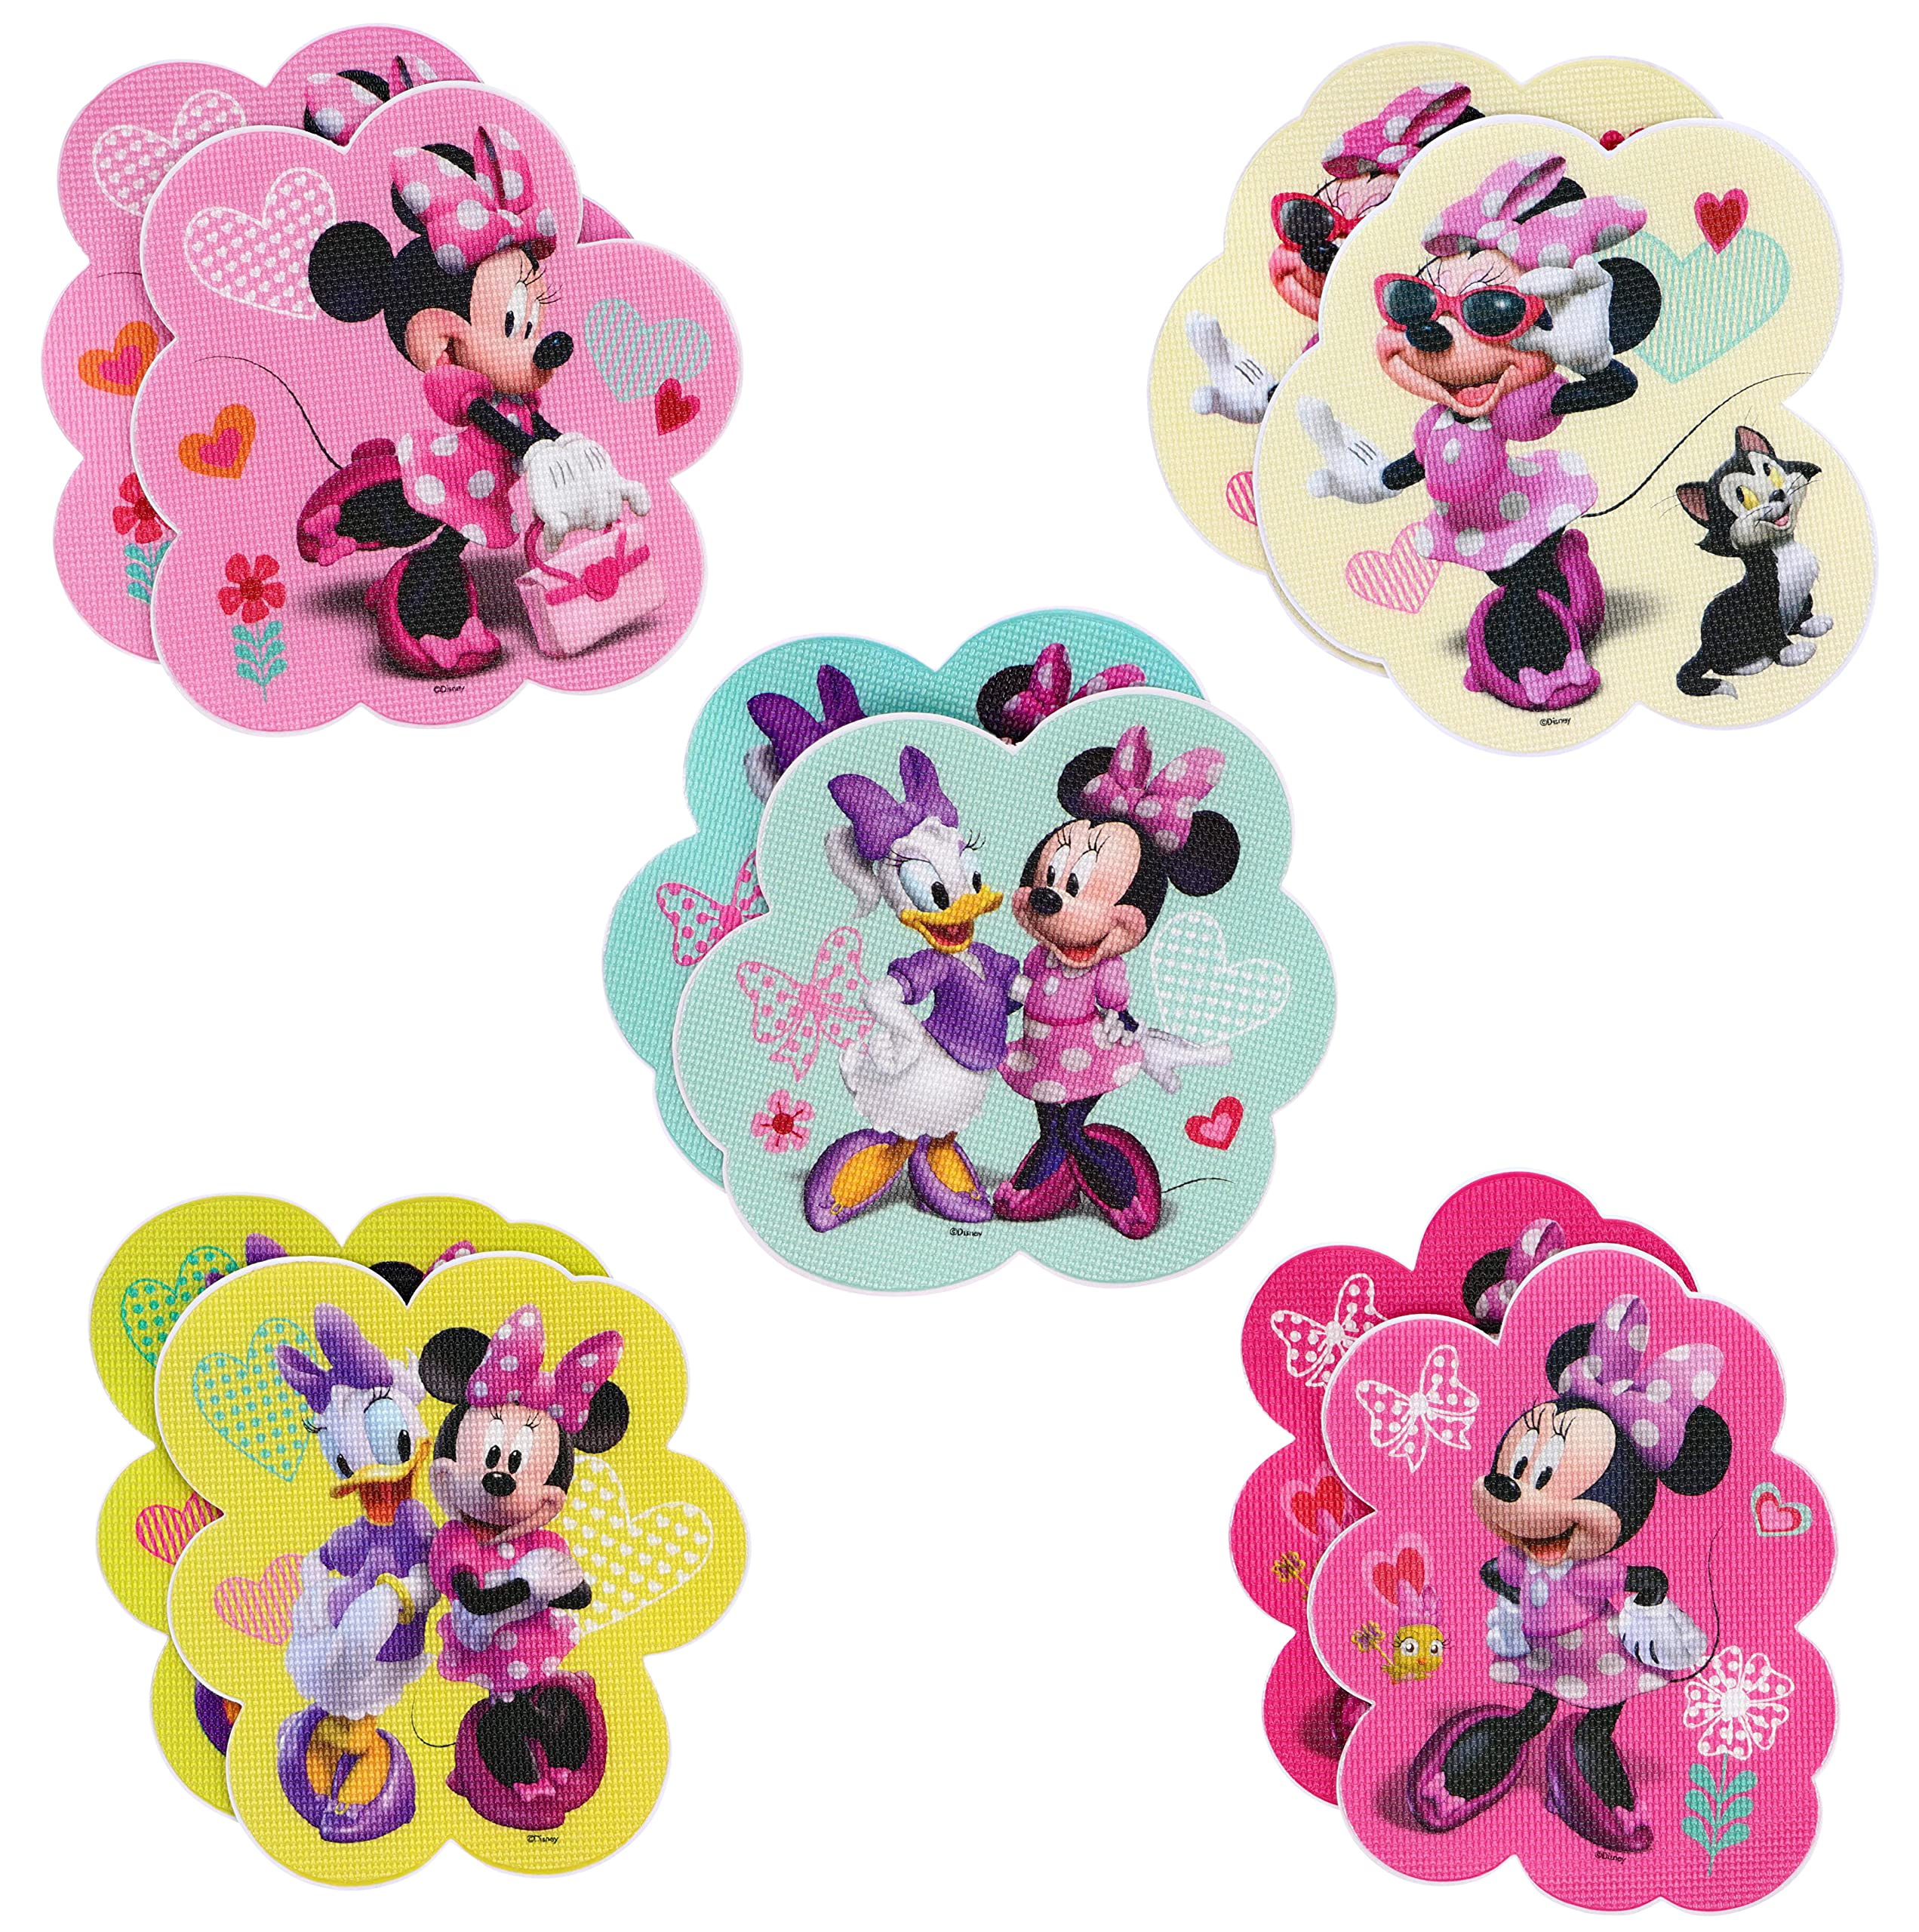 Disney's Minnie Mouse, Daisy, and Figaro Non-Slip Adhesive Tub Applique Decals for Kid's Shower and Bath Safety, Multicolor, 10 Pieces